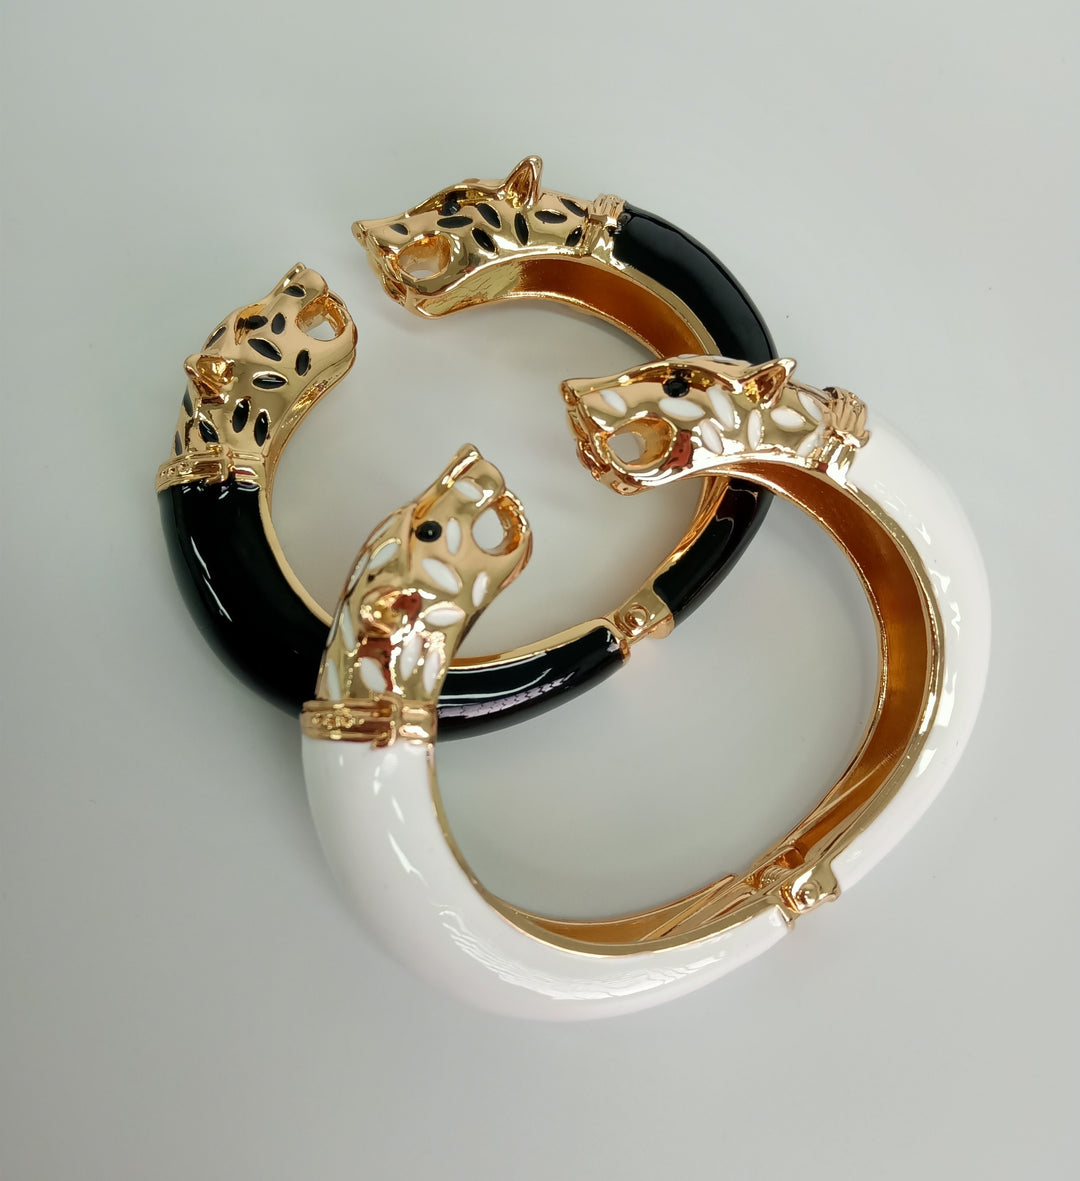 Panther Gilded Cuff Bracelet for women